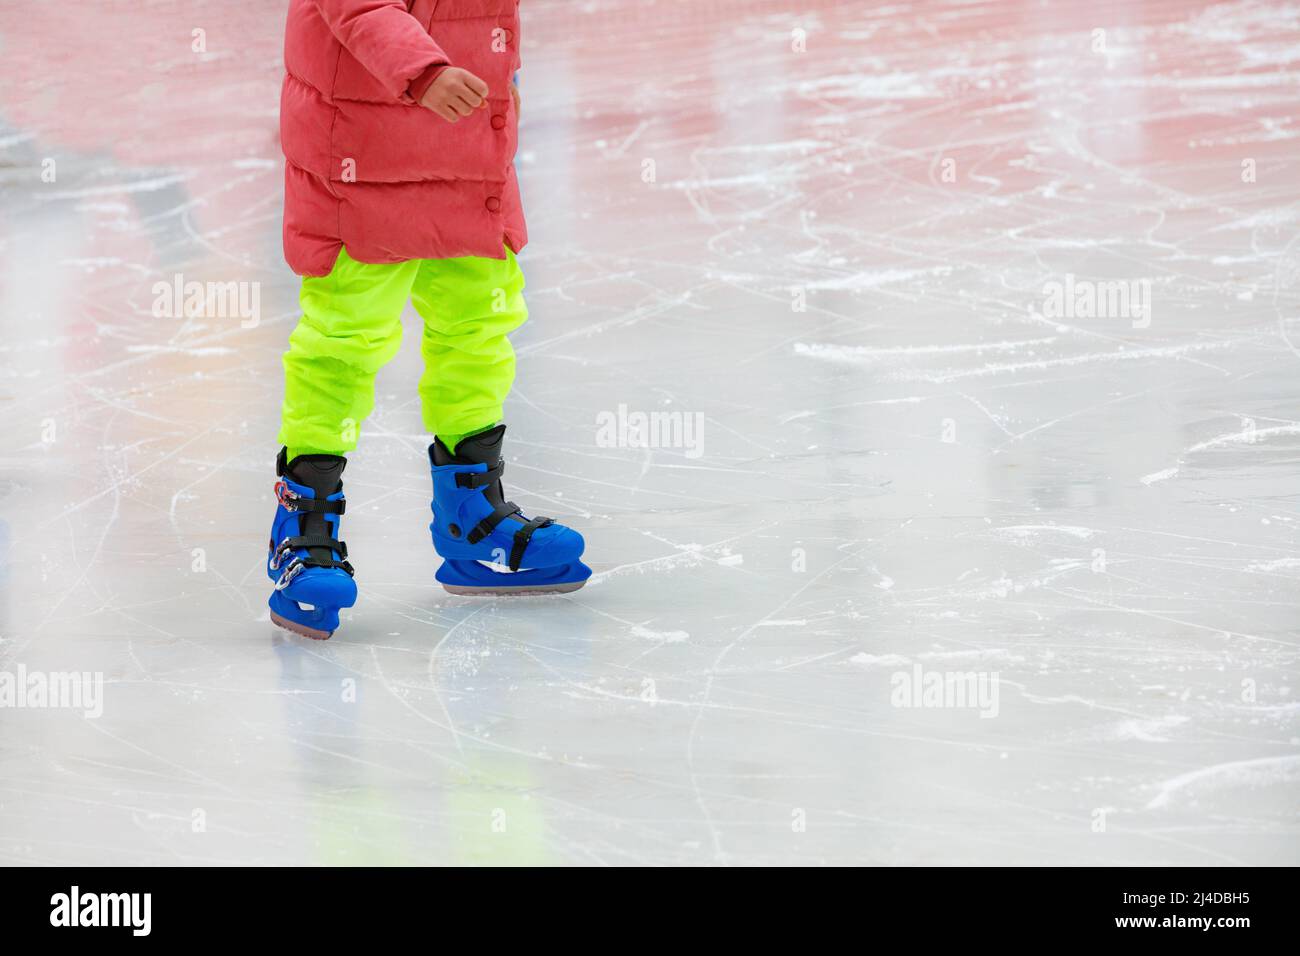 A teenager in bright green sweatpants, a red down jacket and blue skates learns to skate. Copy space, selective focus, close-up. Stock Photo